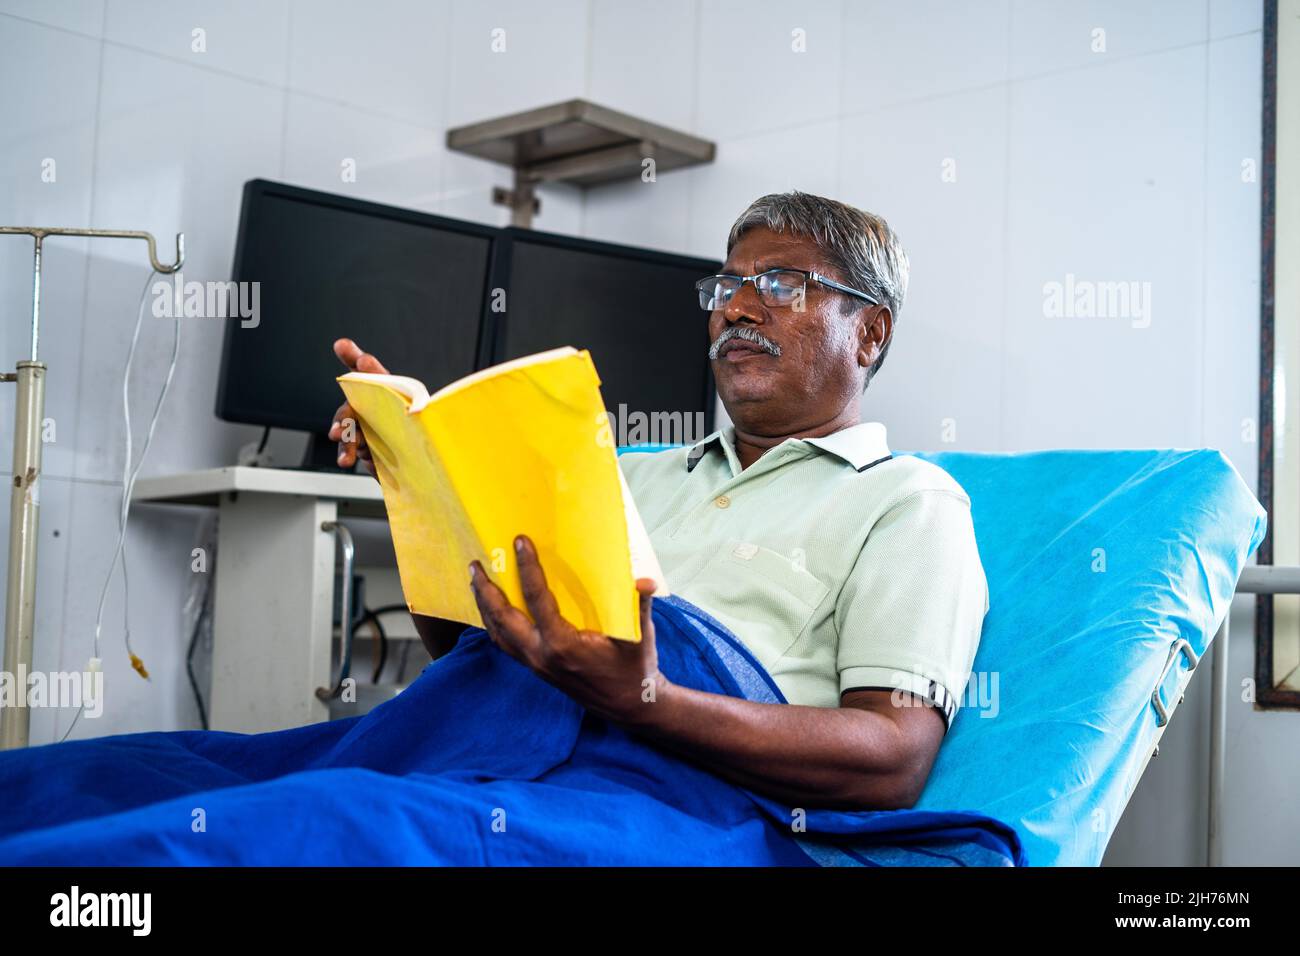 Senior man with eyeglasses reading book at hospital while on bed - concept of relaxation, rehabilitation and medicare treatment. Stock Photo